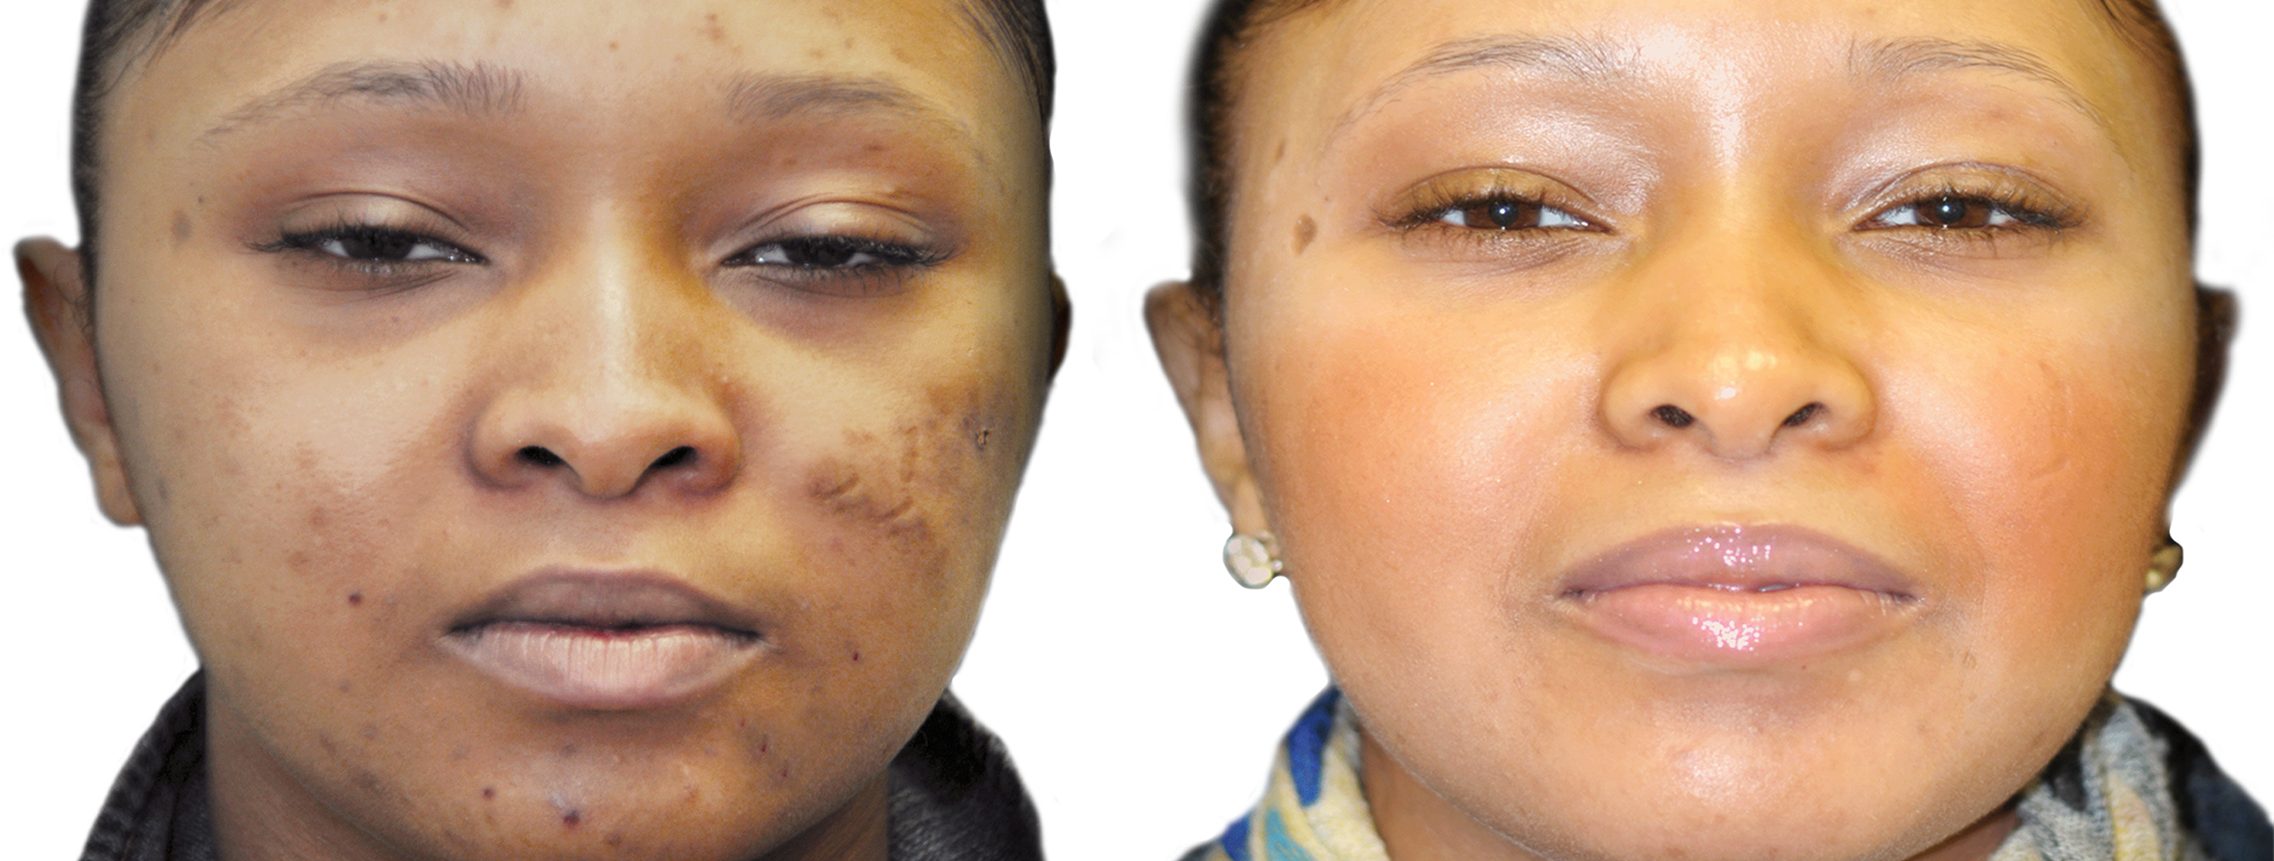 Long Island acne removal before and after